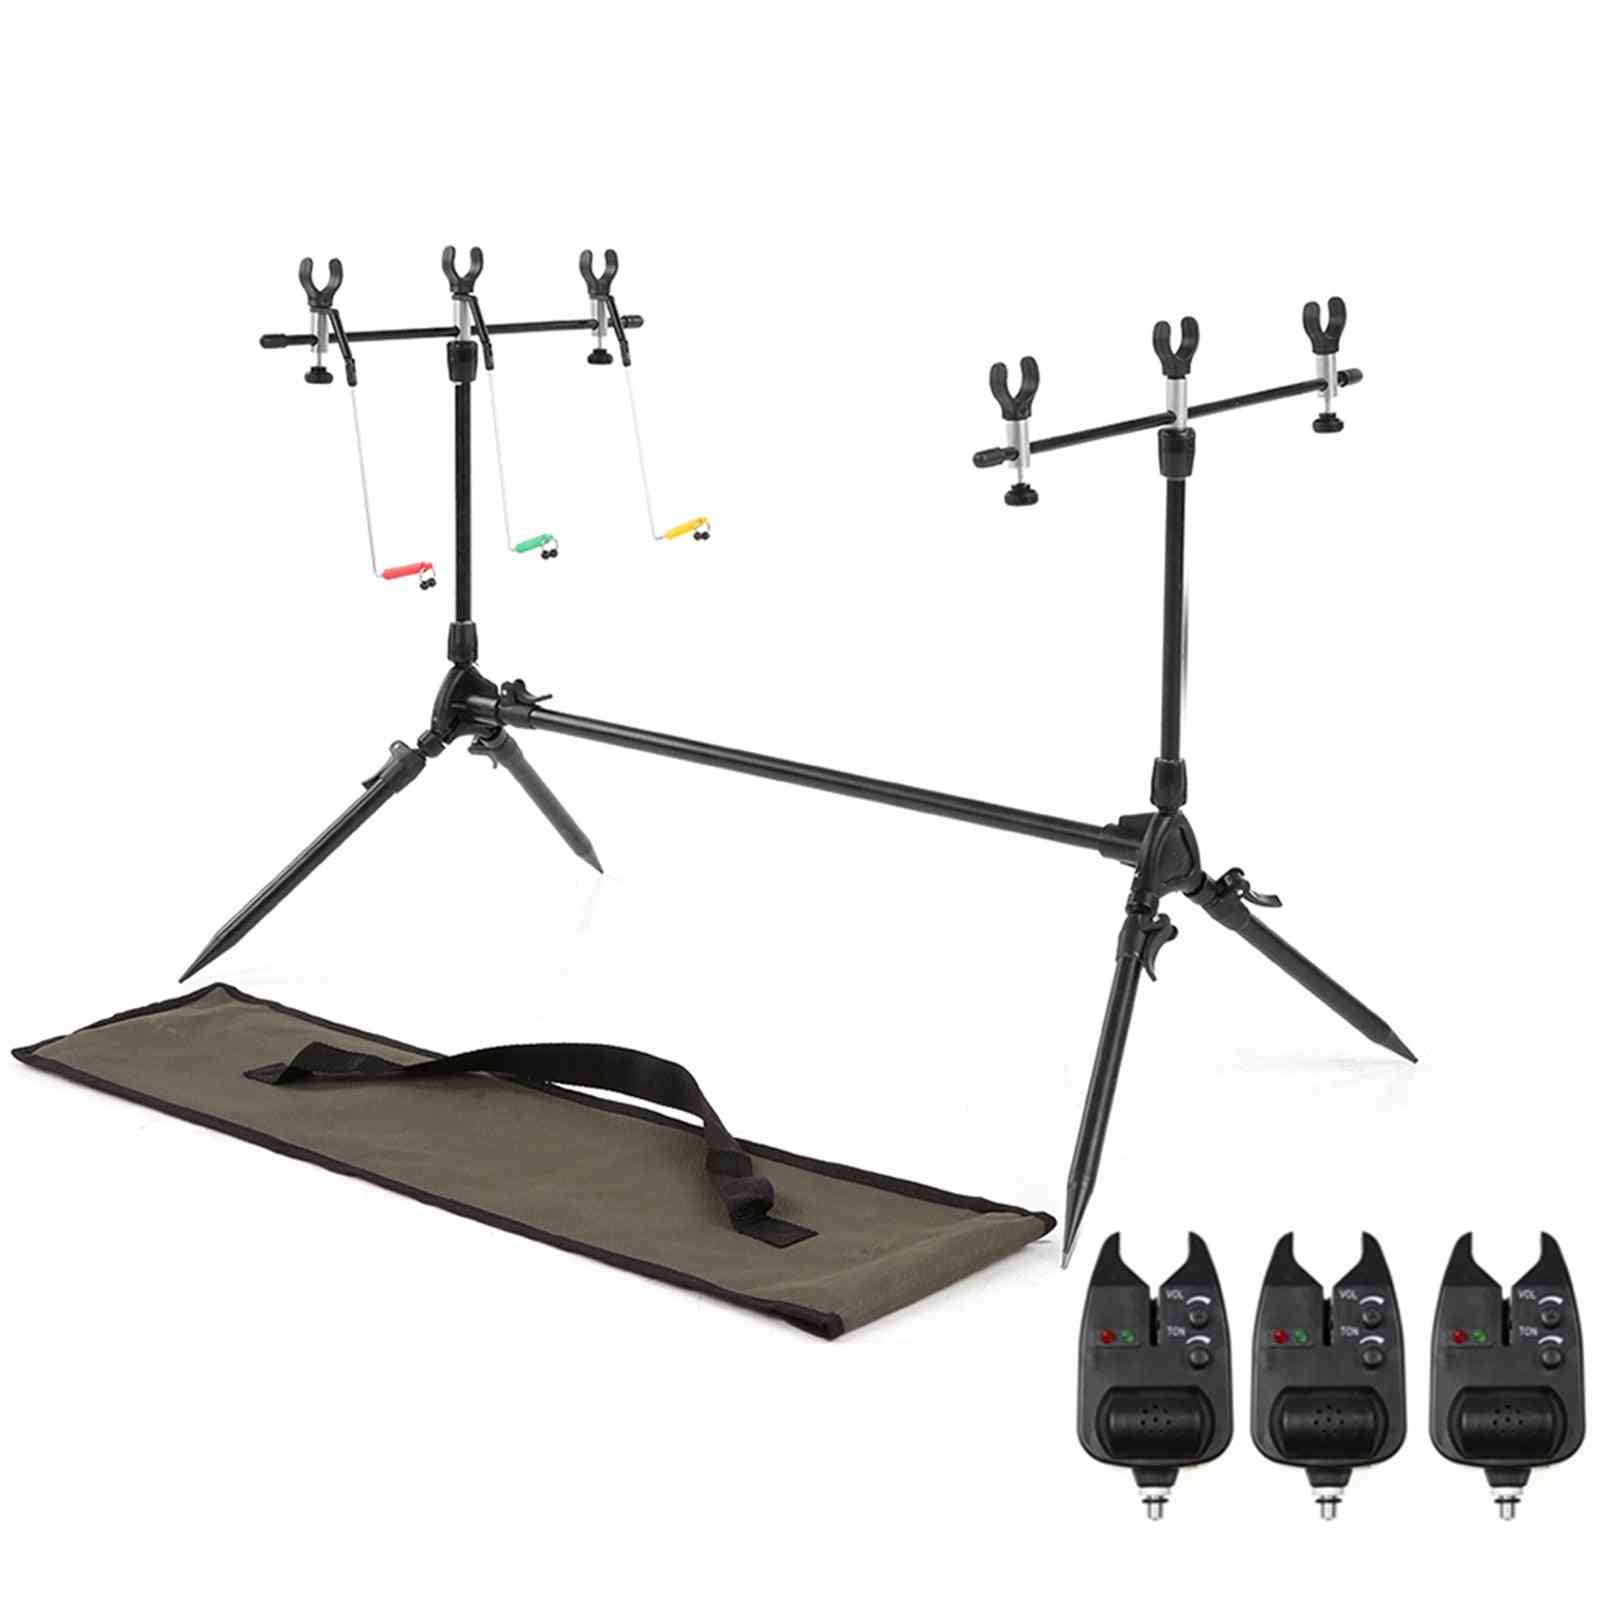 Multi-functional Fishing Rod Stand, Adjustable Retractable, Fish Pole Bracket Accessories